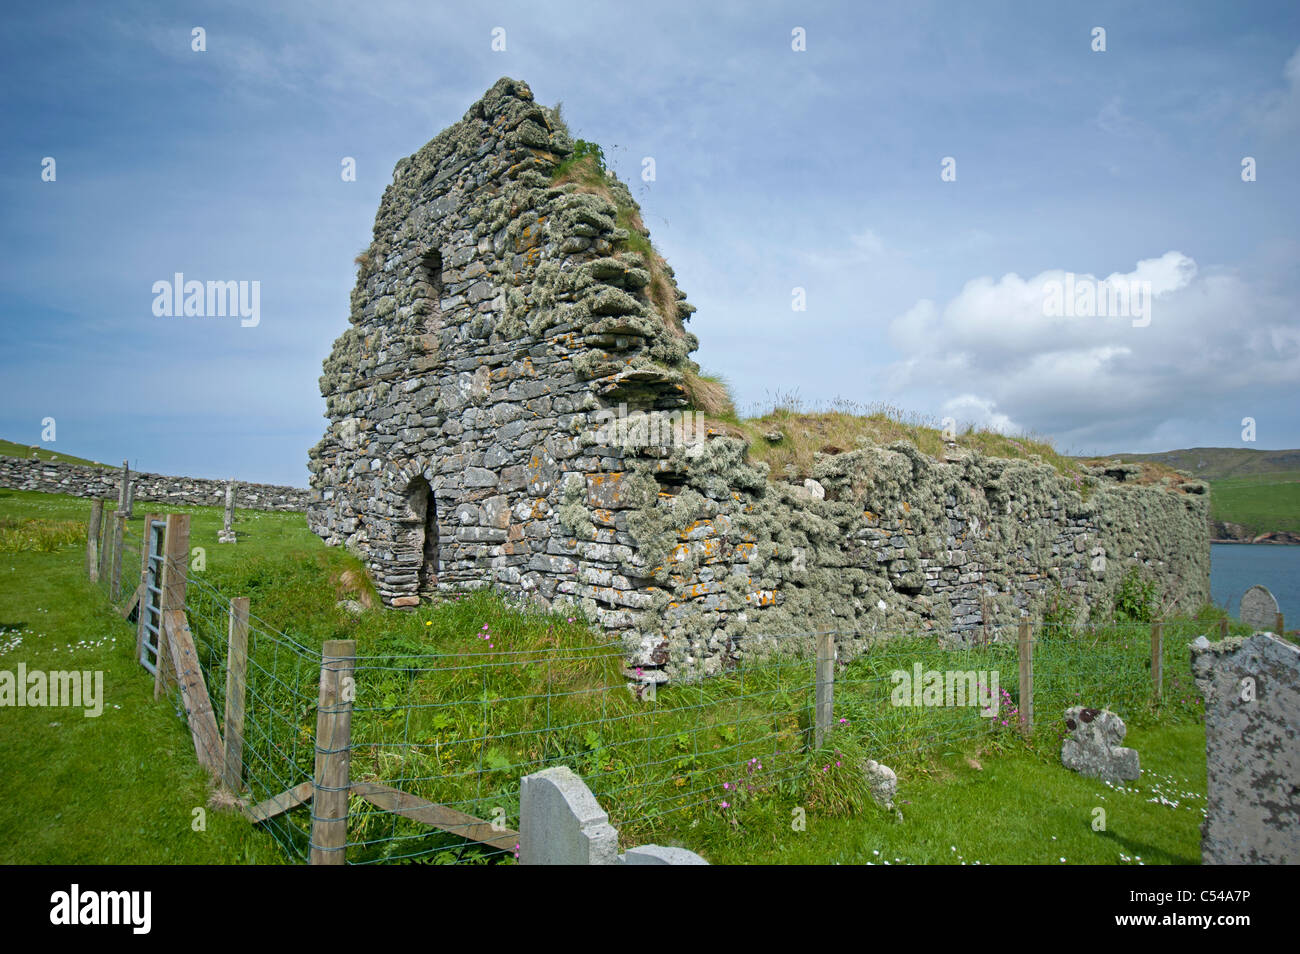 The ancient ruin of St Olaf's Kirk, Unst Shetland. SCO 7503 Stock Photo